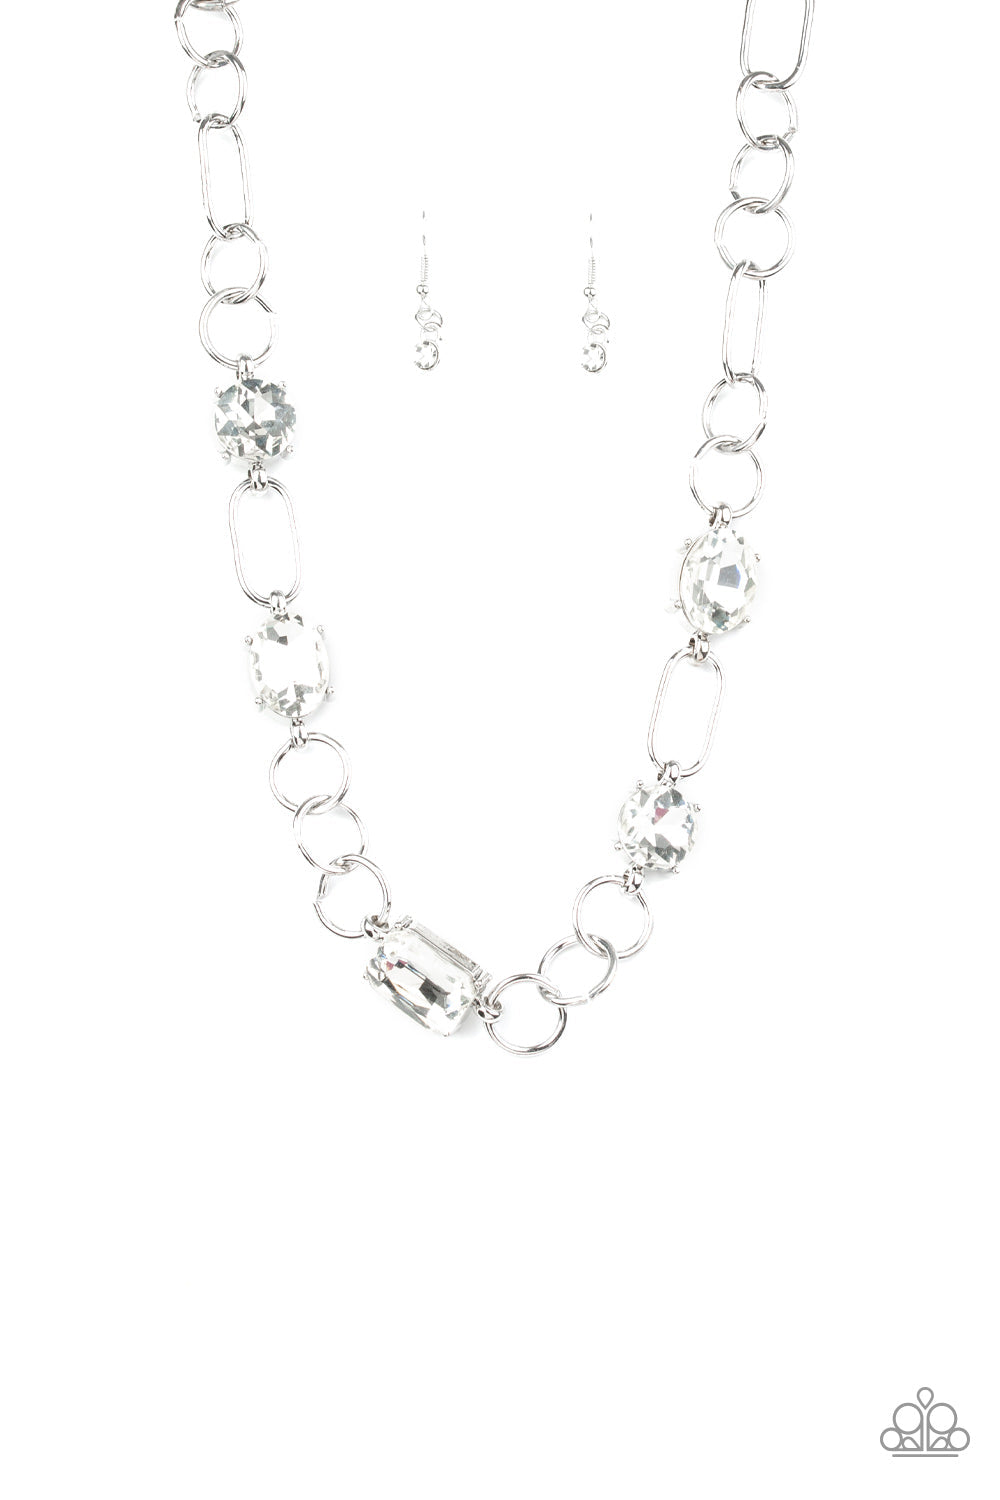 Urban District - White and Silver Fashion Necklace - Paparazzi Accessories - Featuring round, oval, and emerald style cuts, glittery white rhinestone fittings link with mismatched silver rings below the collar for an edgy glamorous look. Features an adjustable clasp closure. Sold as one individual necklace.